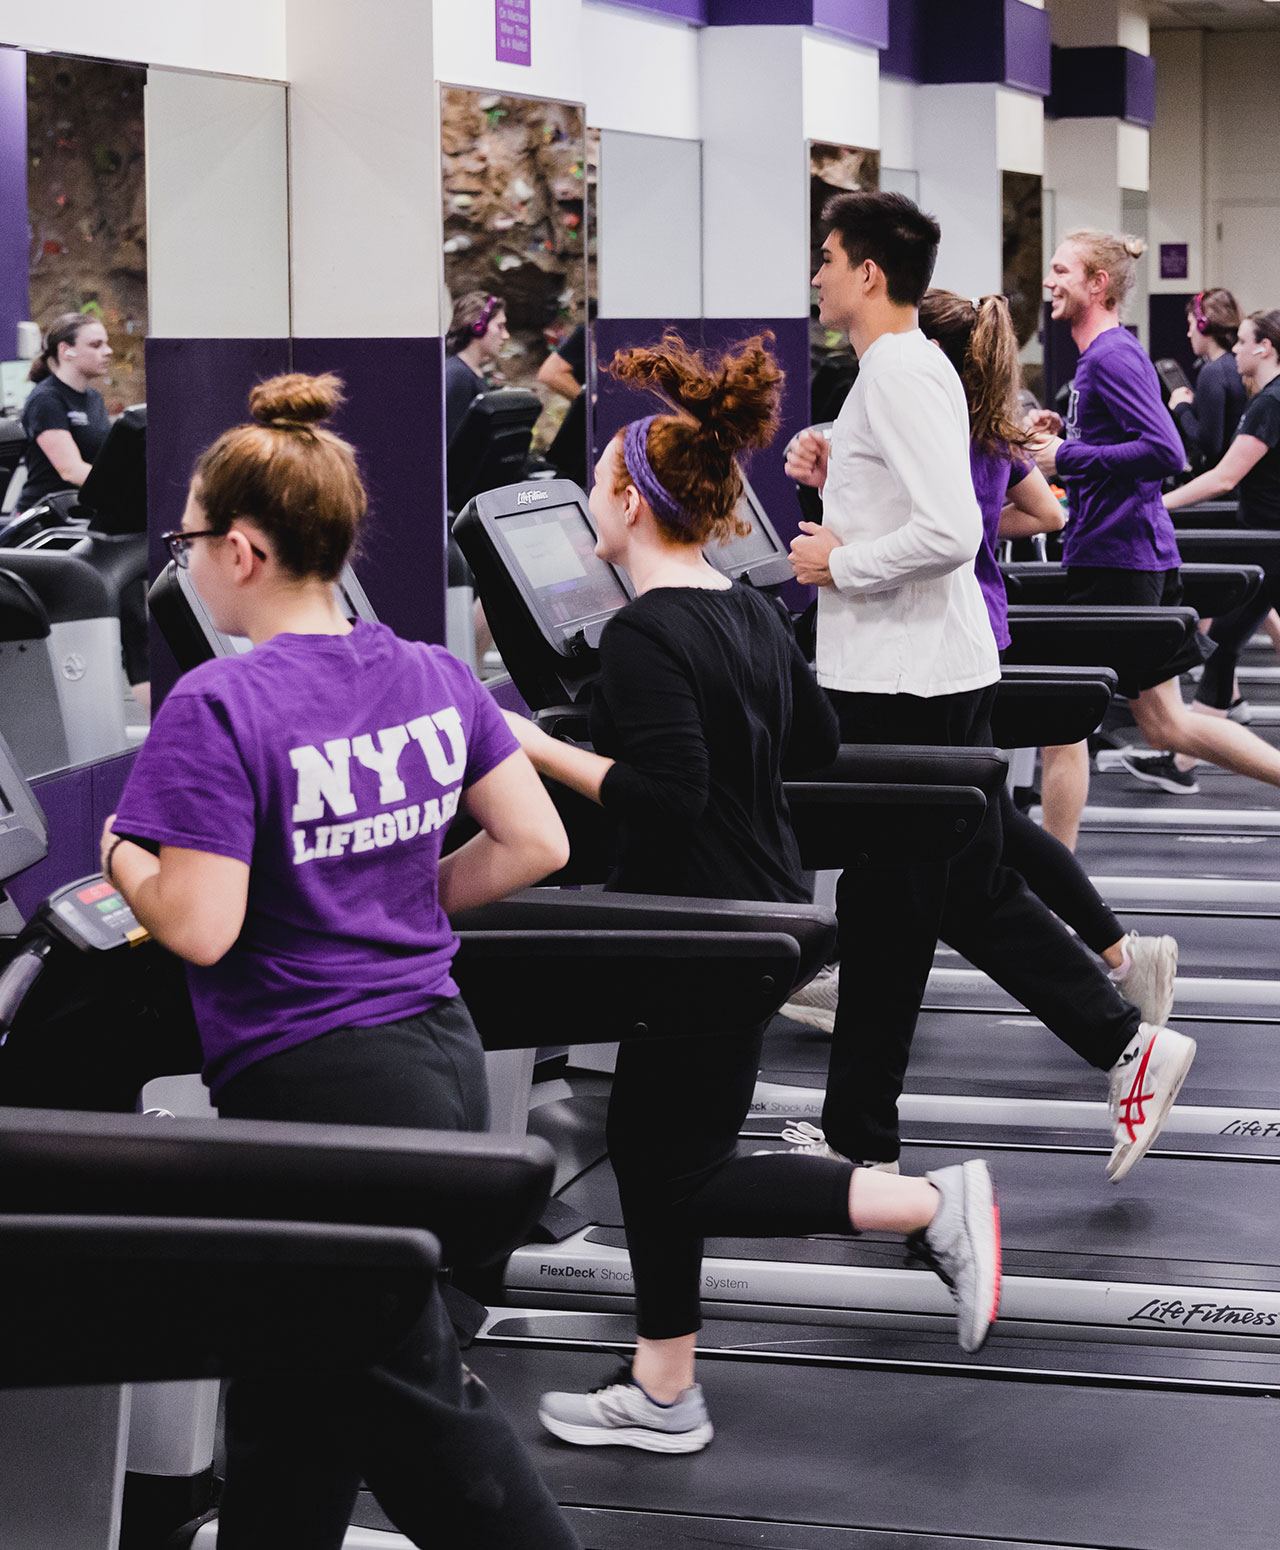 A group of students running on treadmills.